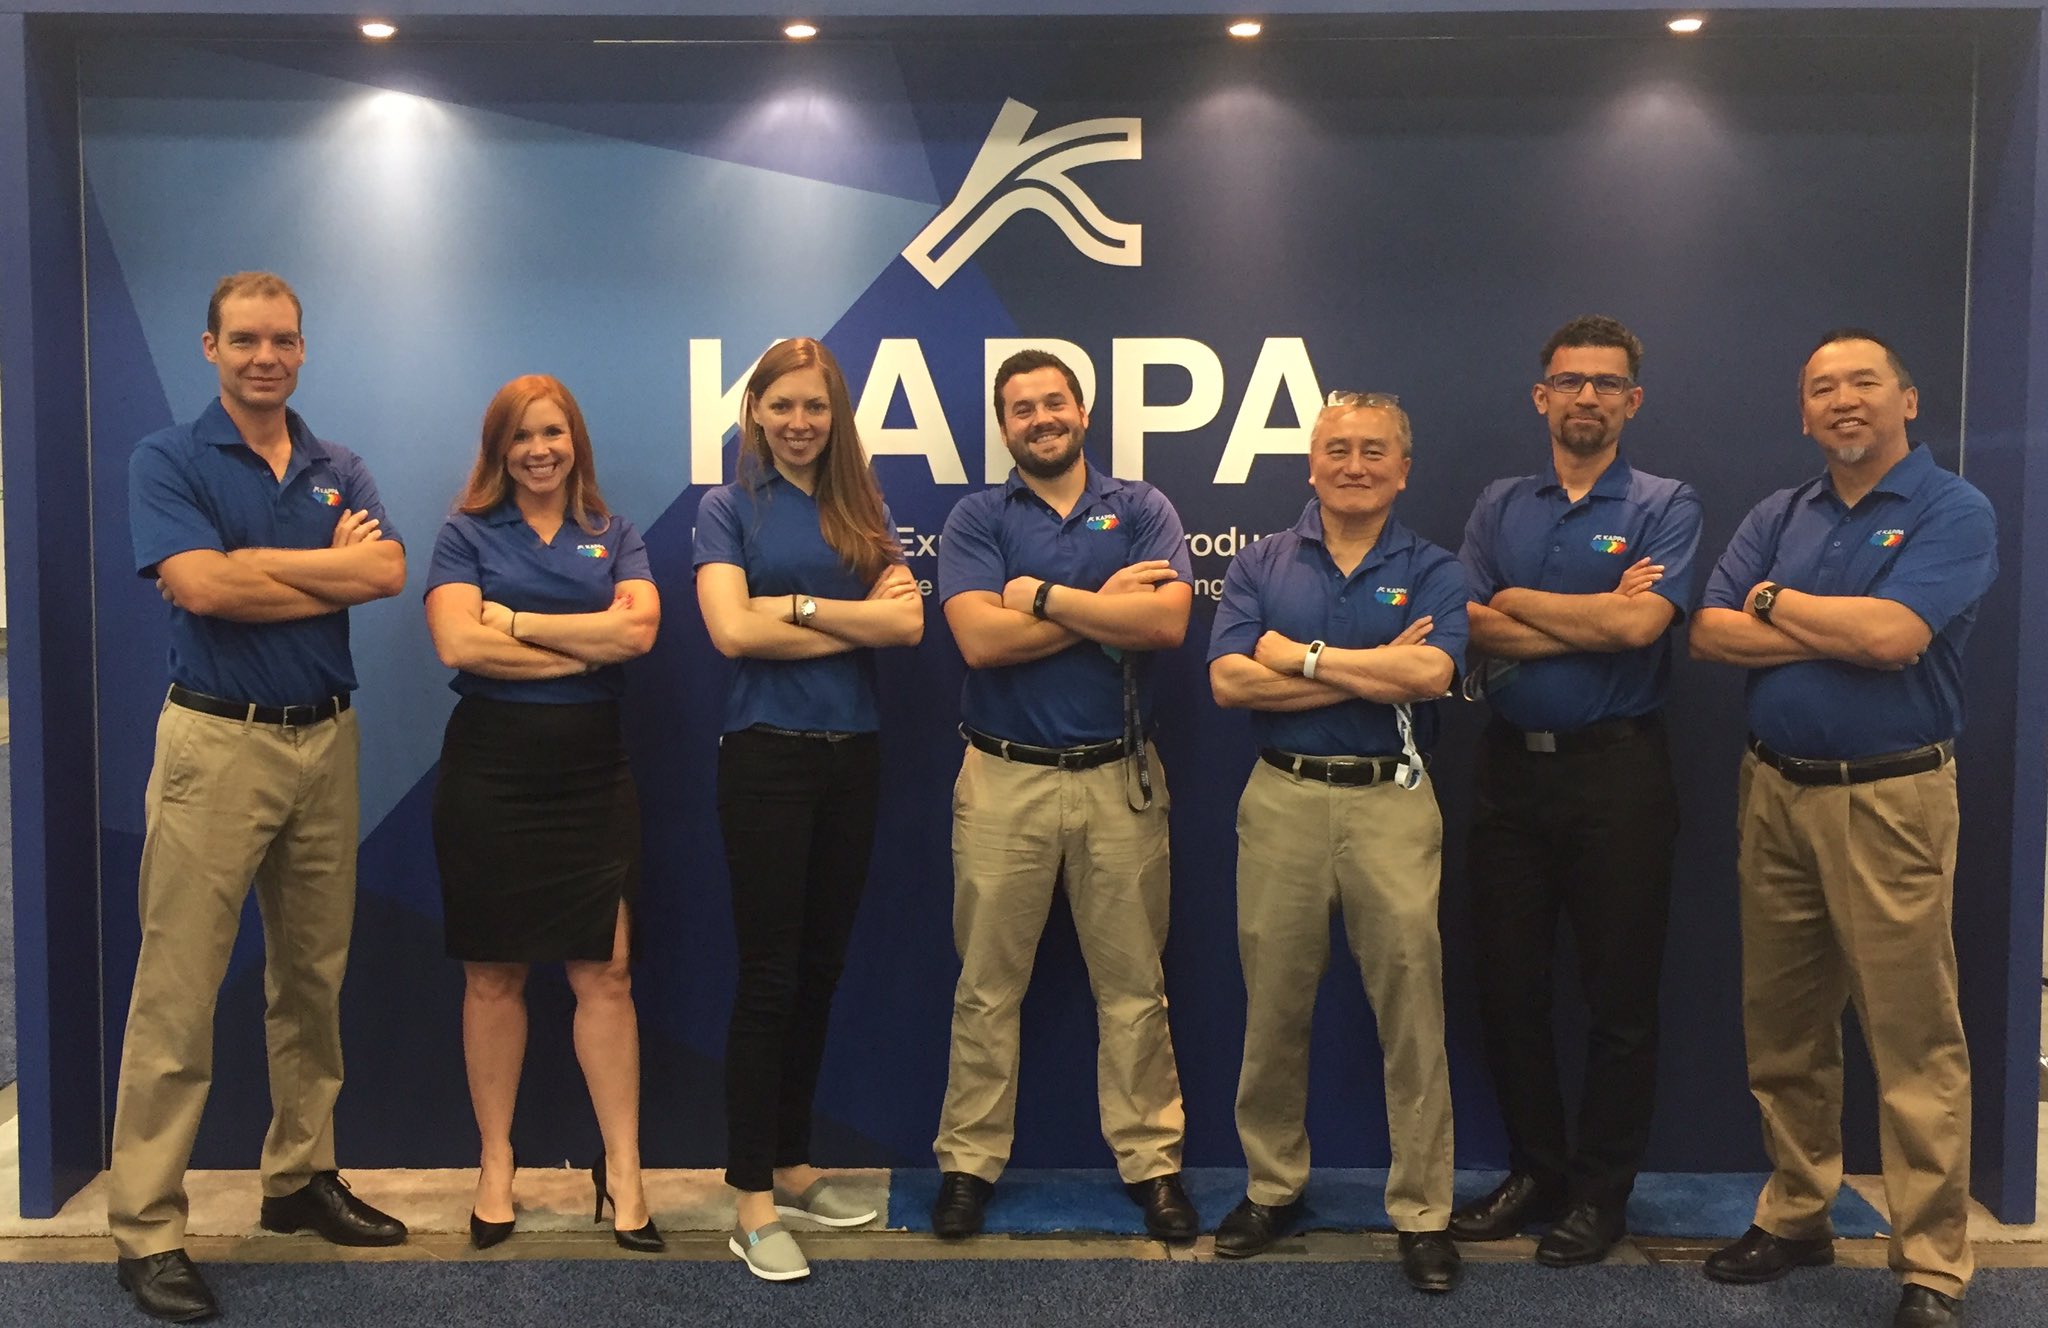 KAPPA on Twitter: "Visit #kappaeng at #urtec2017 booth 637 #unconventional #multiphase #analysis #rta https://t.co/u0yPGwEd1P" / Twitter